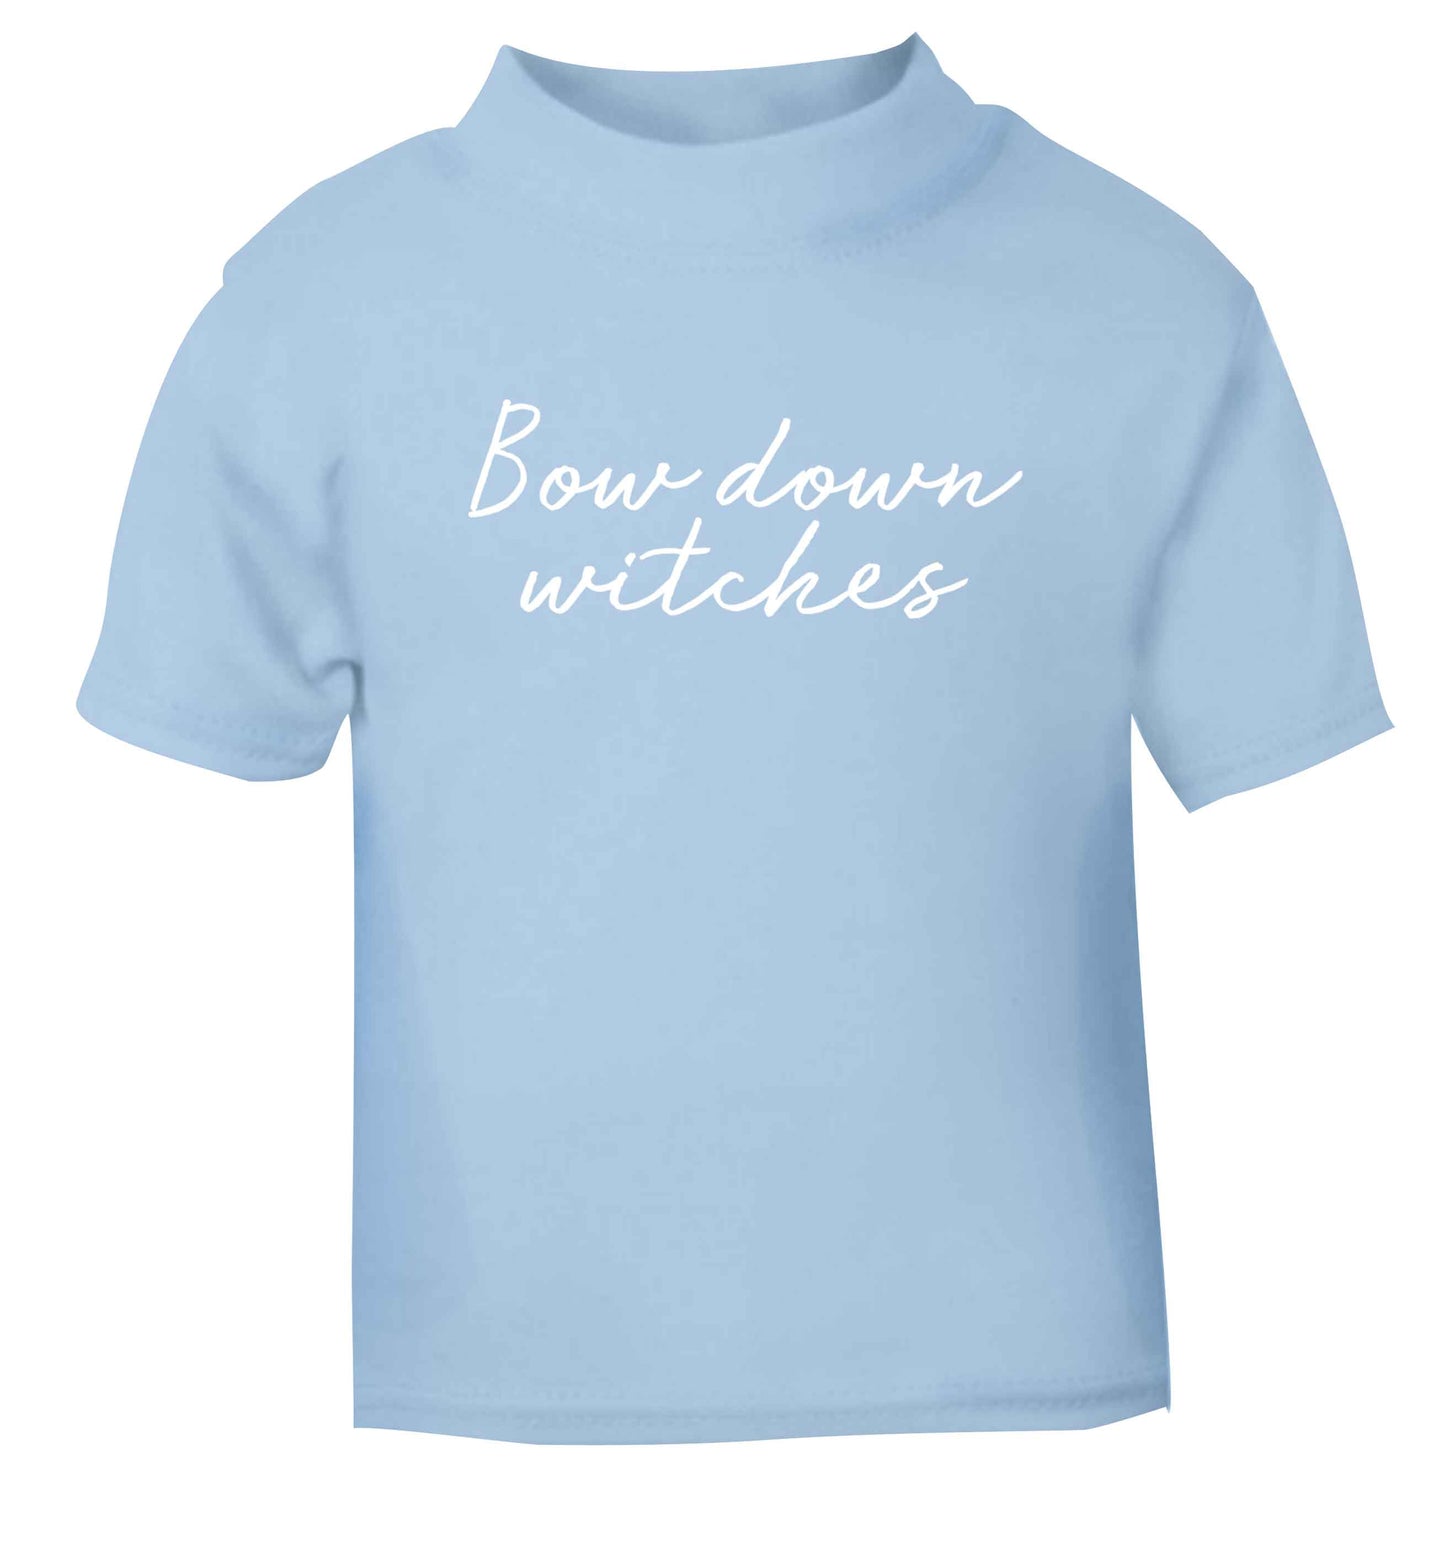 Bow down witches light blue baby toddler Tshirt 2 Years